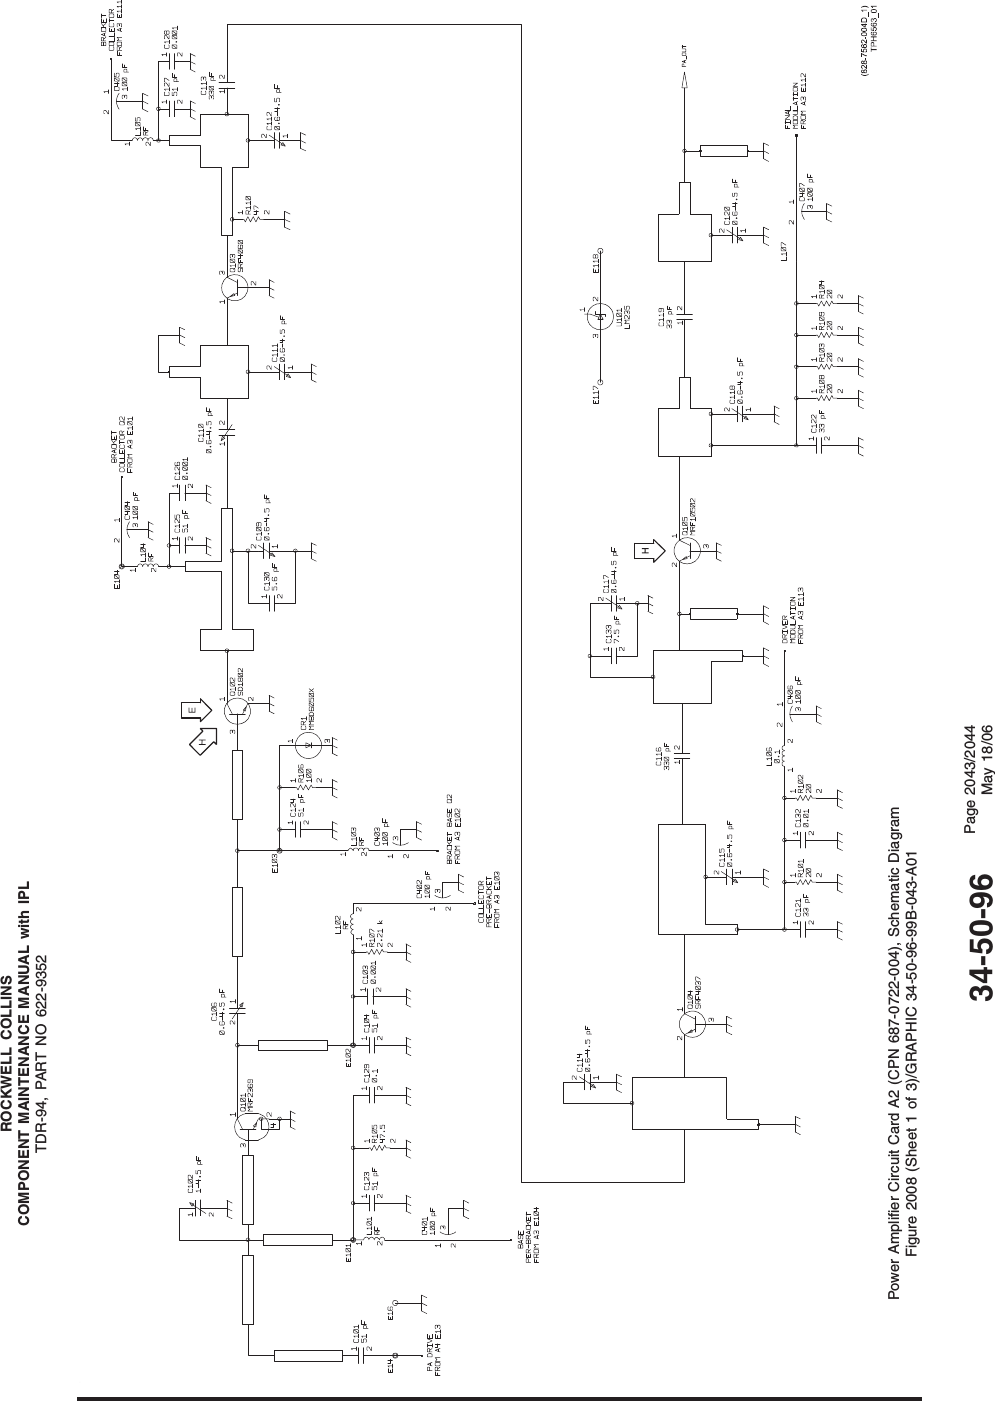 ROCKWELL COLLINSCOMPONENT MAINTENANCE MANUAL with IPLTDR-94, PART NO 622-9352Power Amplifier Circuit Card A2 (CPN 687-0722-004), Schematic DiagramFigure 2008 (Sheet 1 of 3)/GRAPHIC 34-50-96-99B-043-A0134-50-96 Page 2043/2044May 18/06